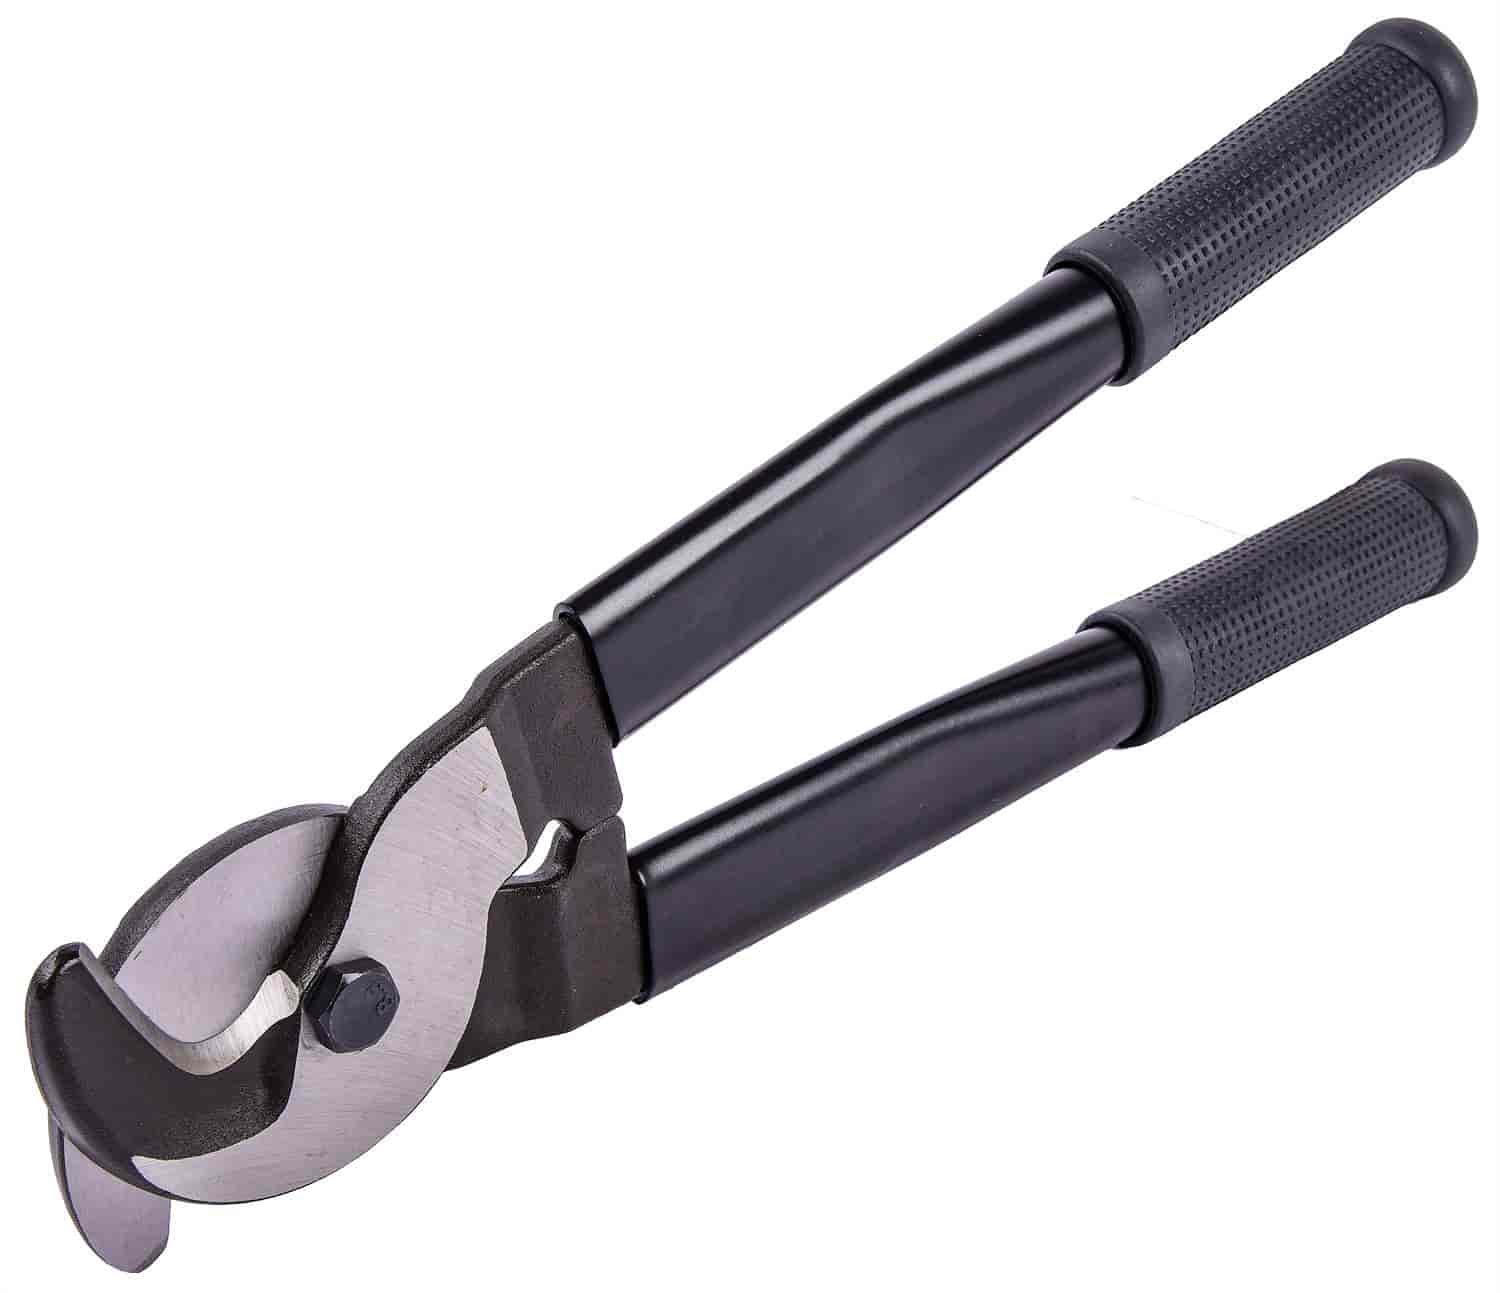 Cable Cutters Overall Length: 14"